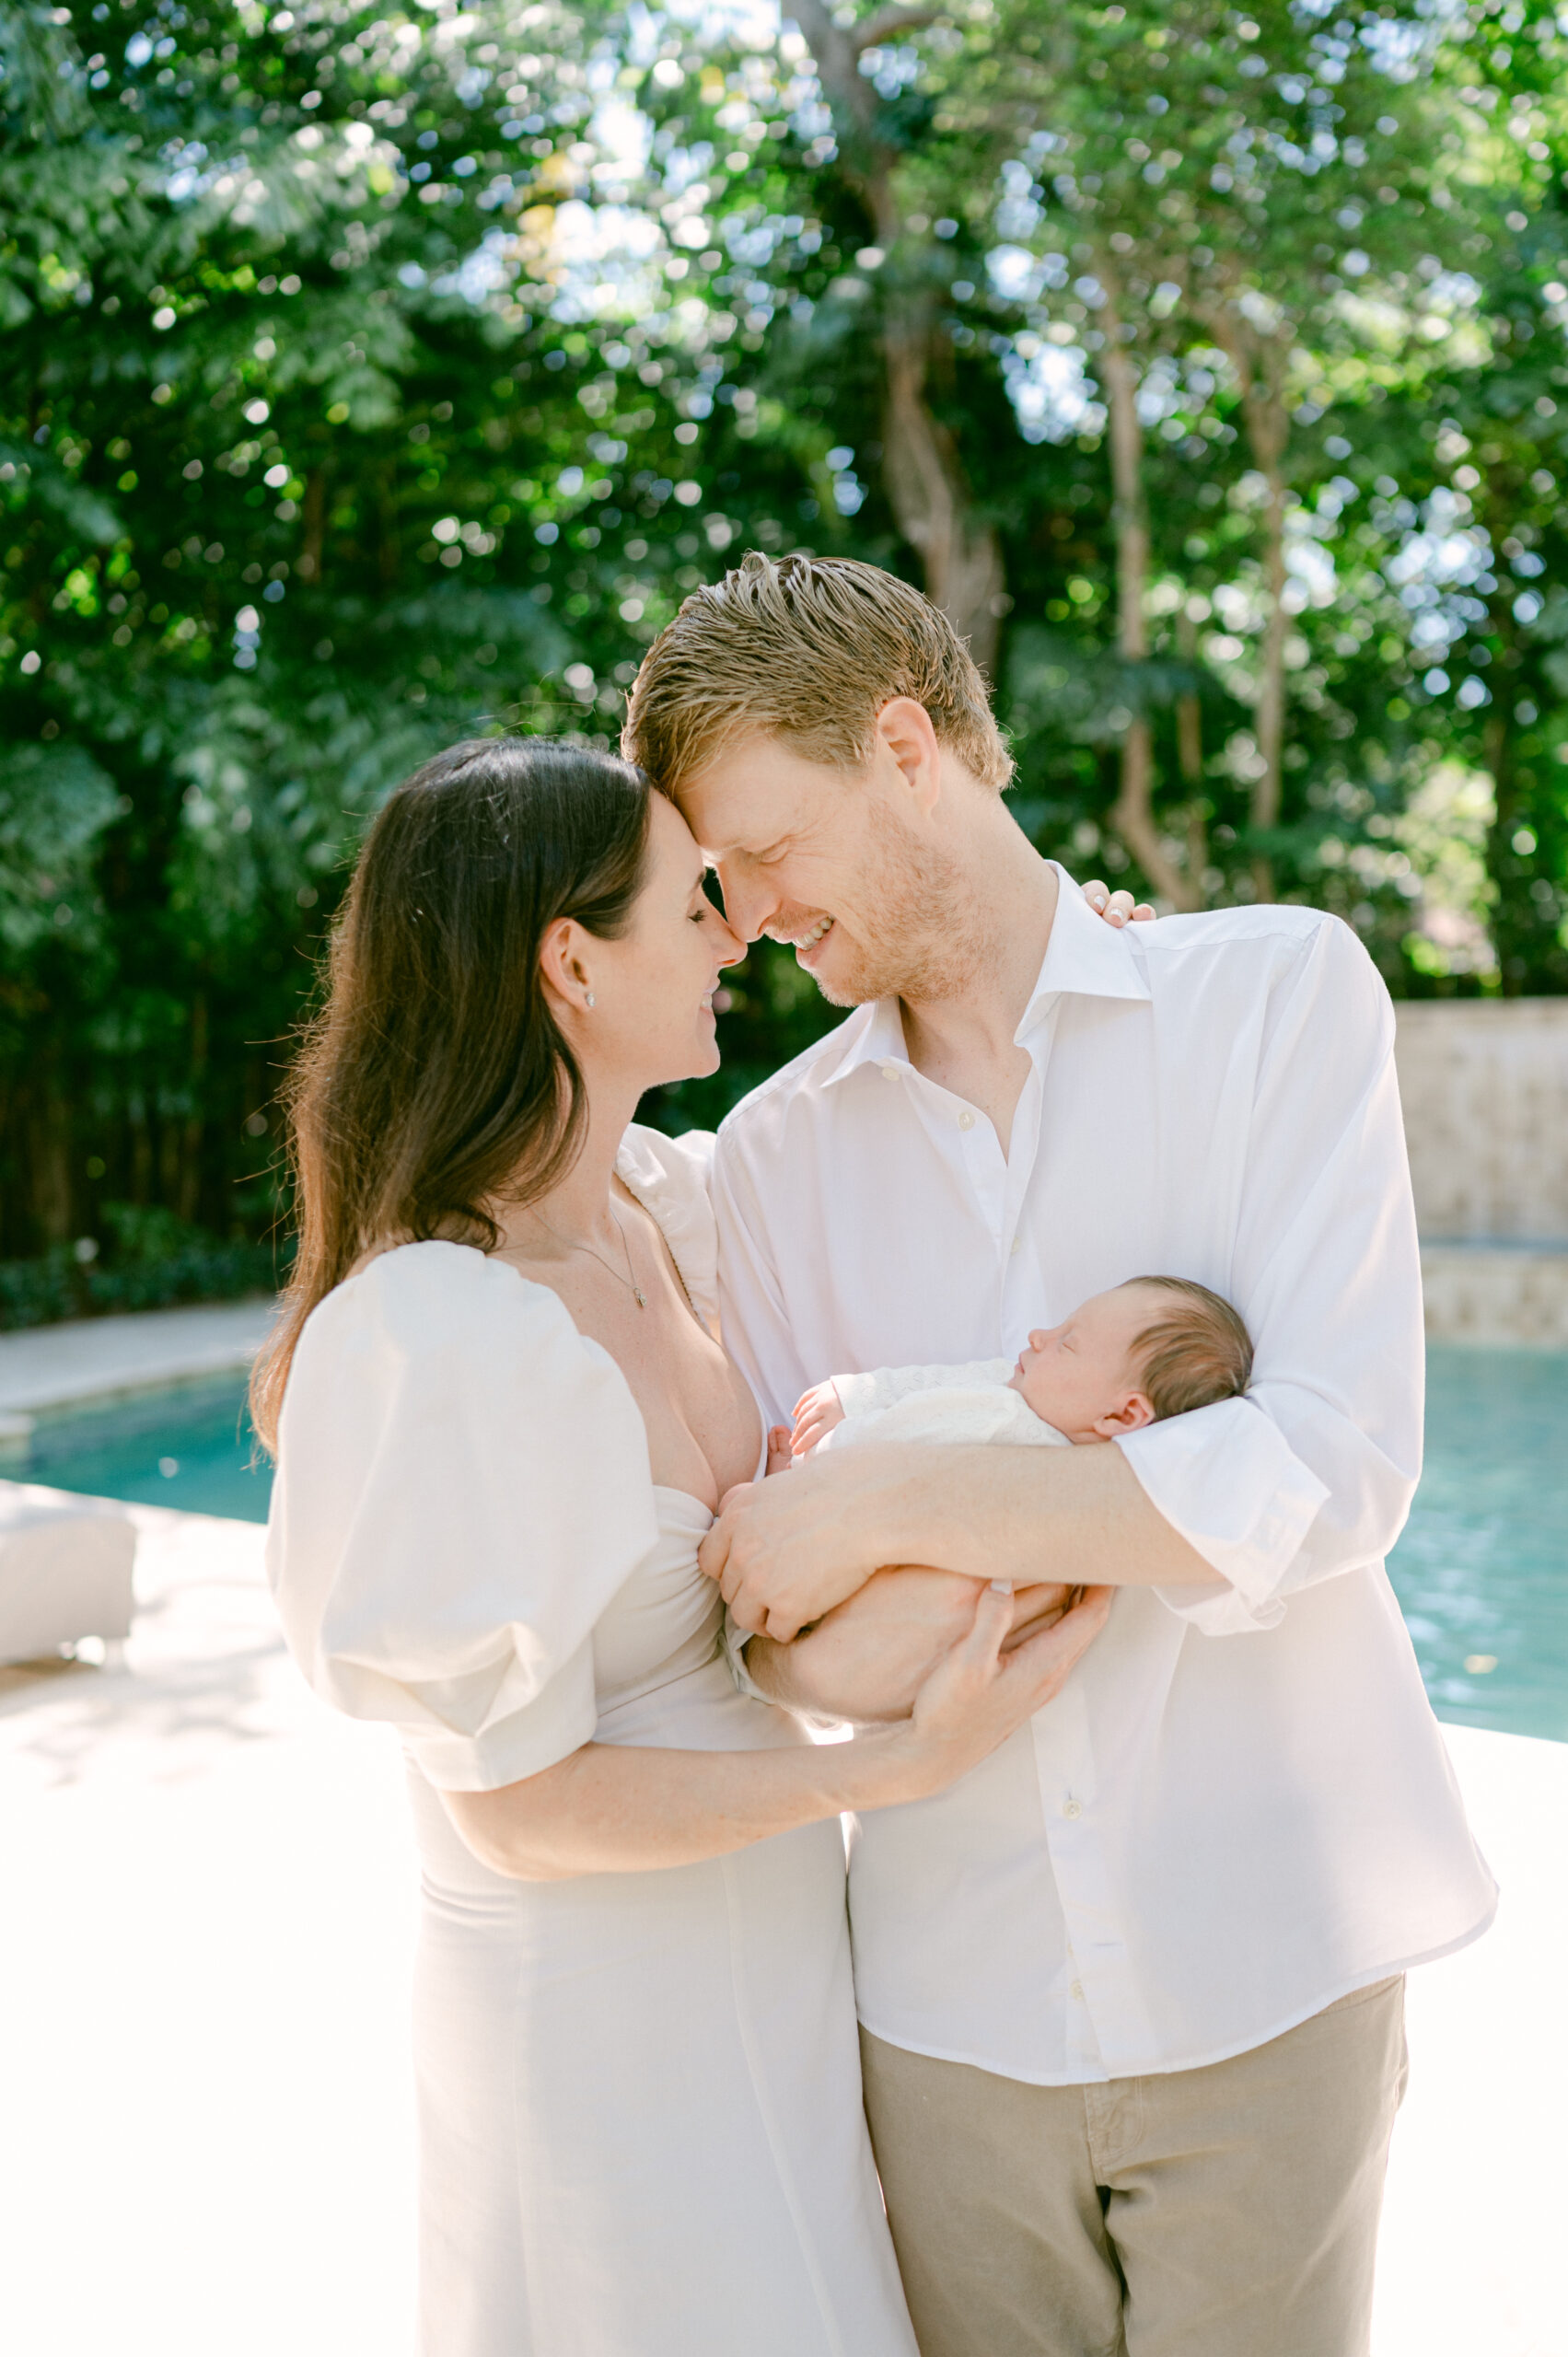 Outdoor newborn session by the pool